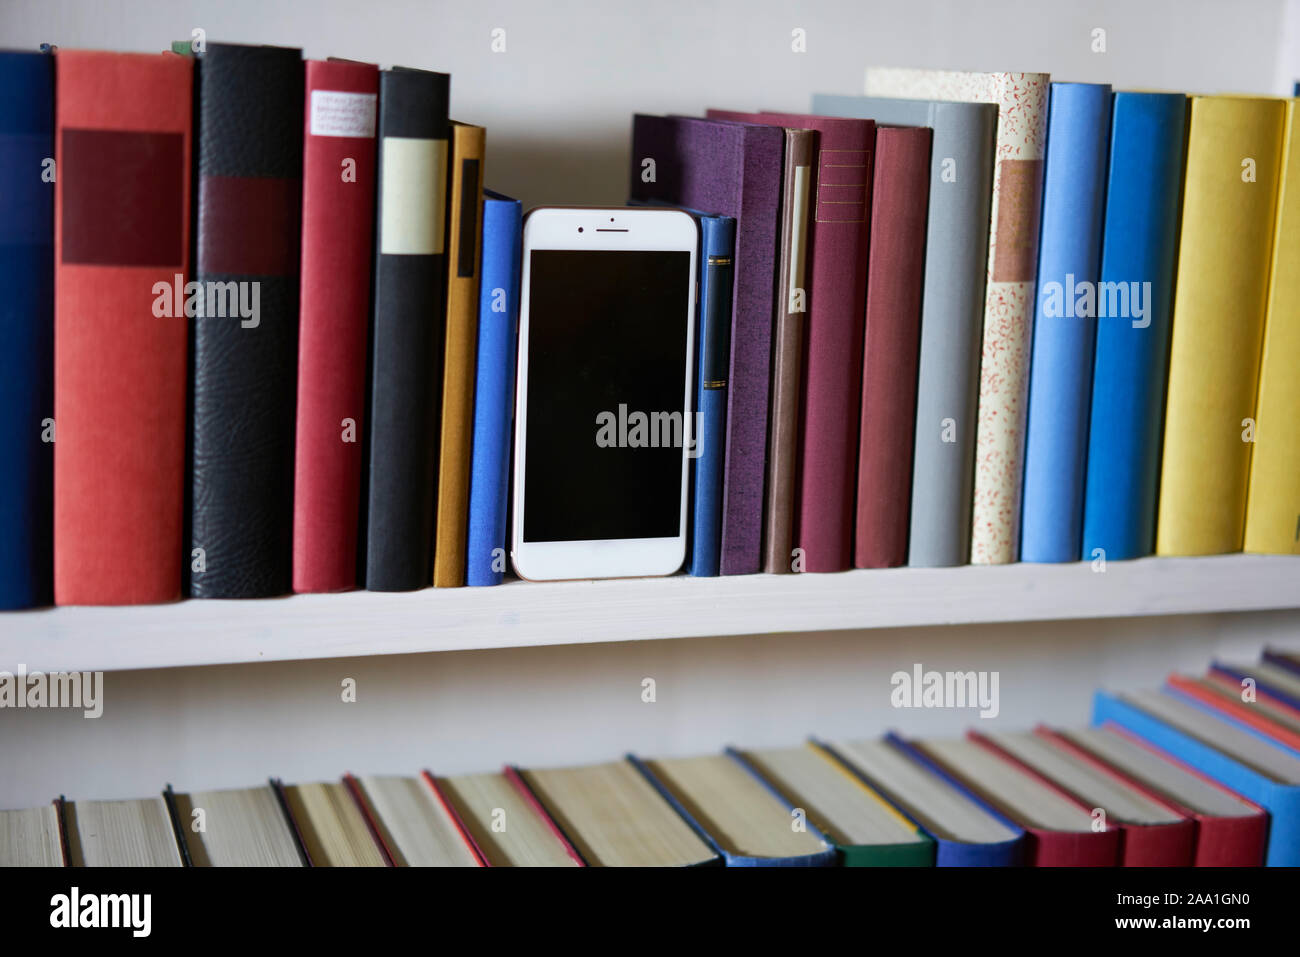 Mobile phone in colorful and accurate bookshelf, standing upright Stock Photo